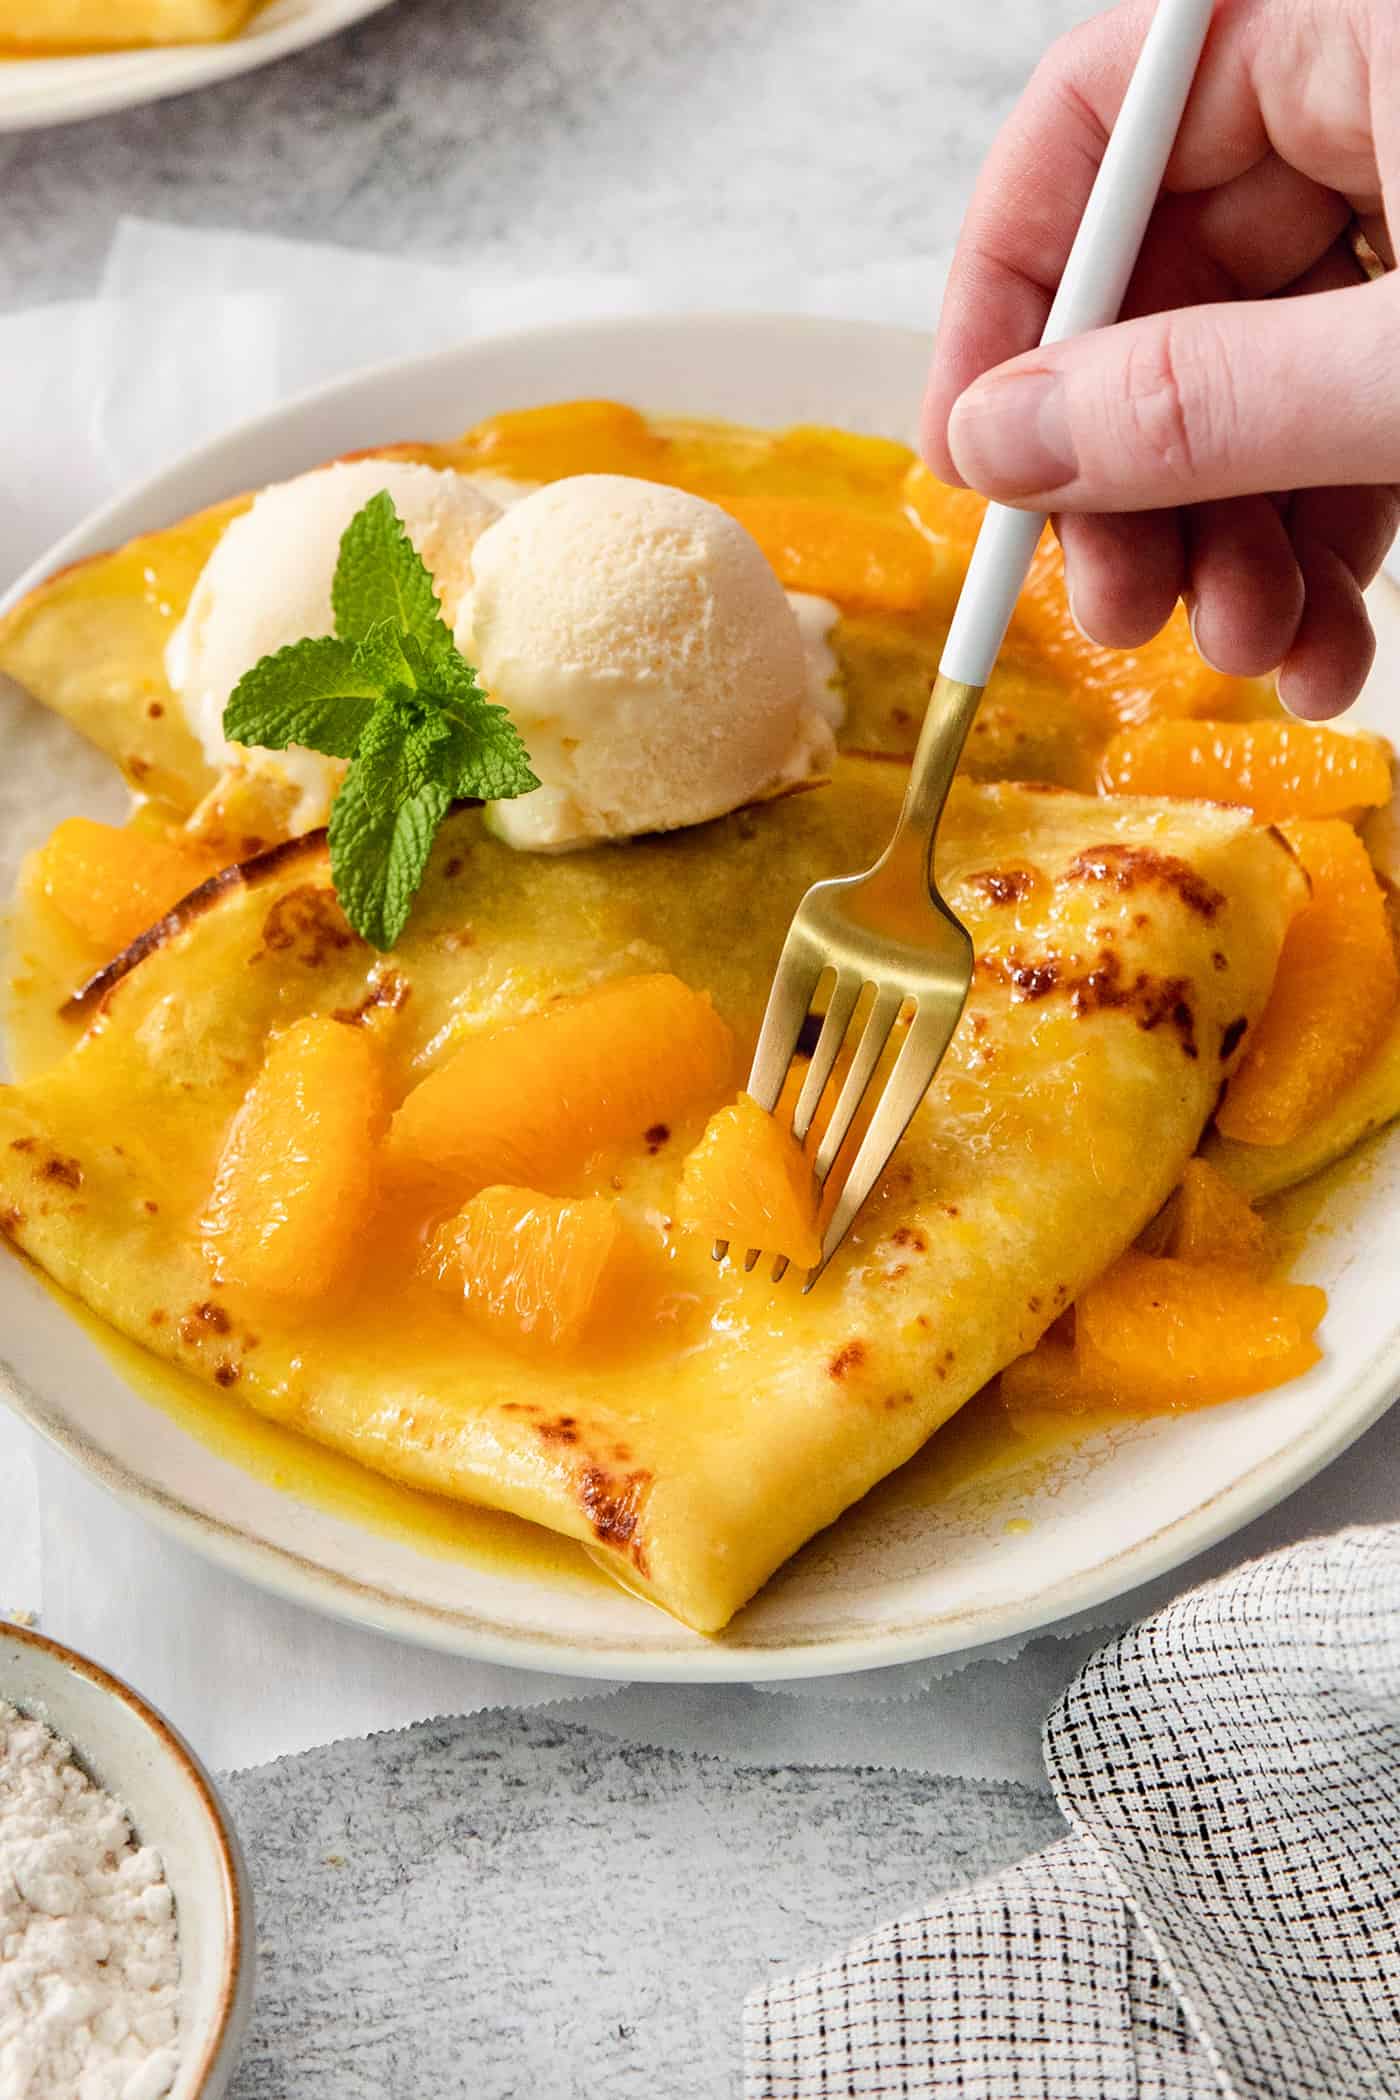 A scoop of vanilla ice cream tops crepes Suzette as a fork cuts into them.